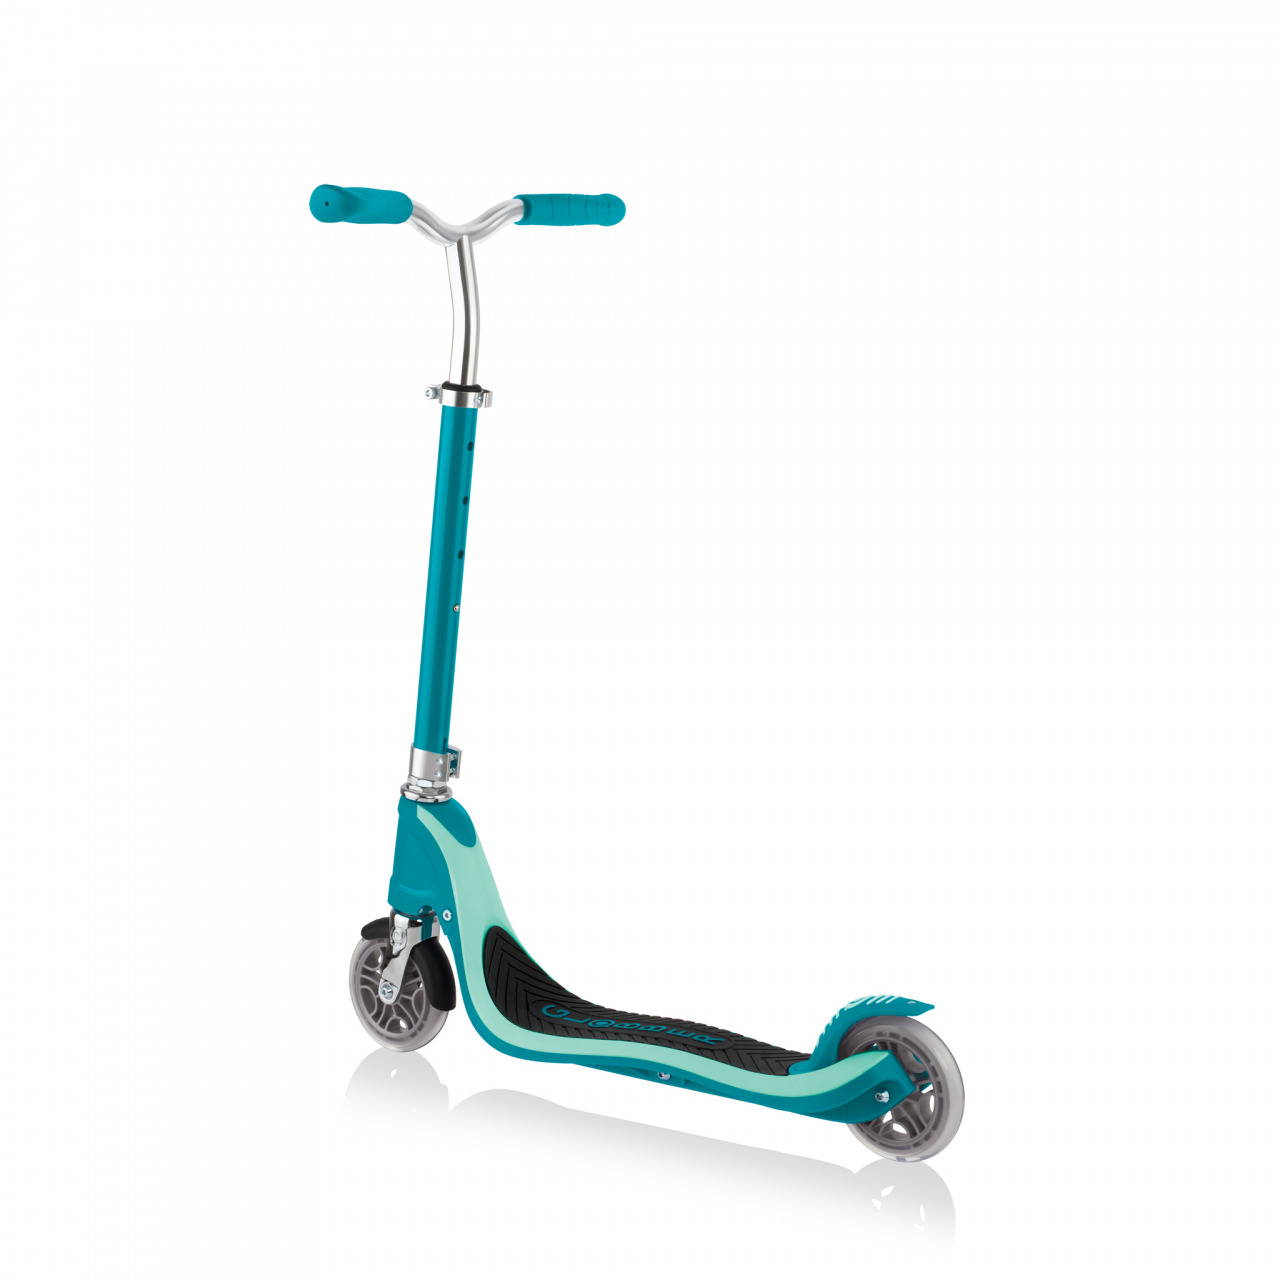 770 105 Kick Scooter For Teenager